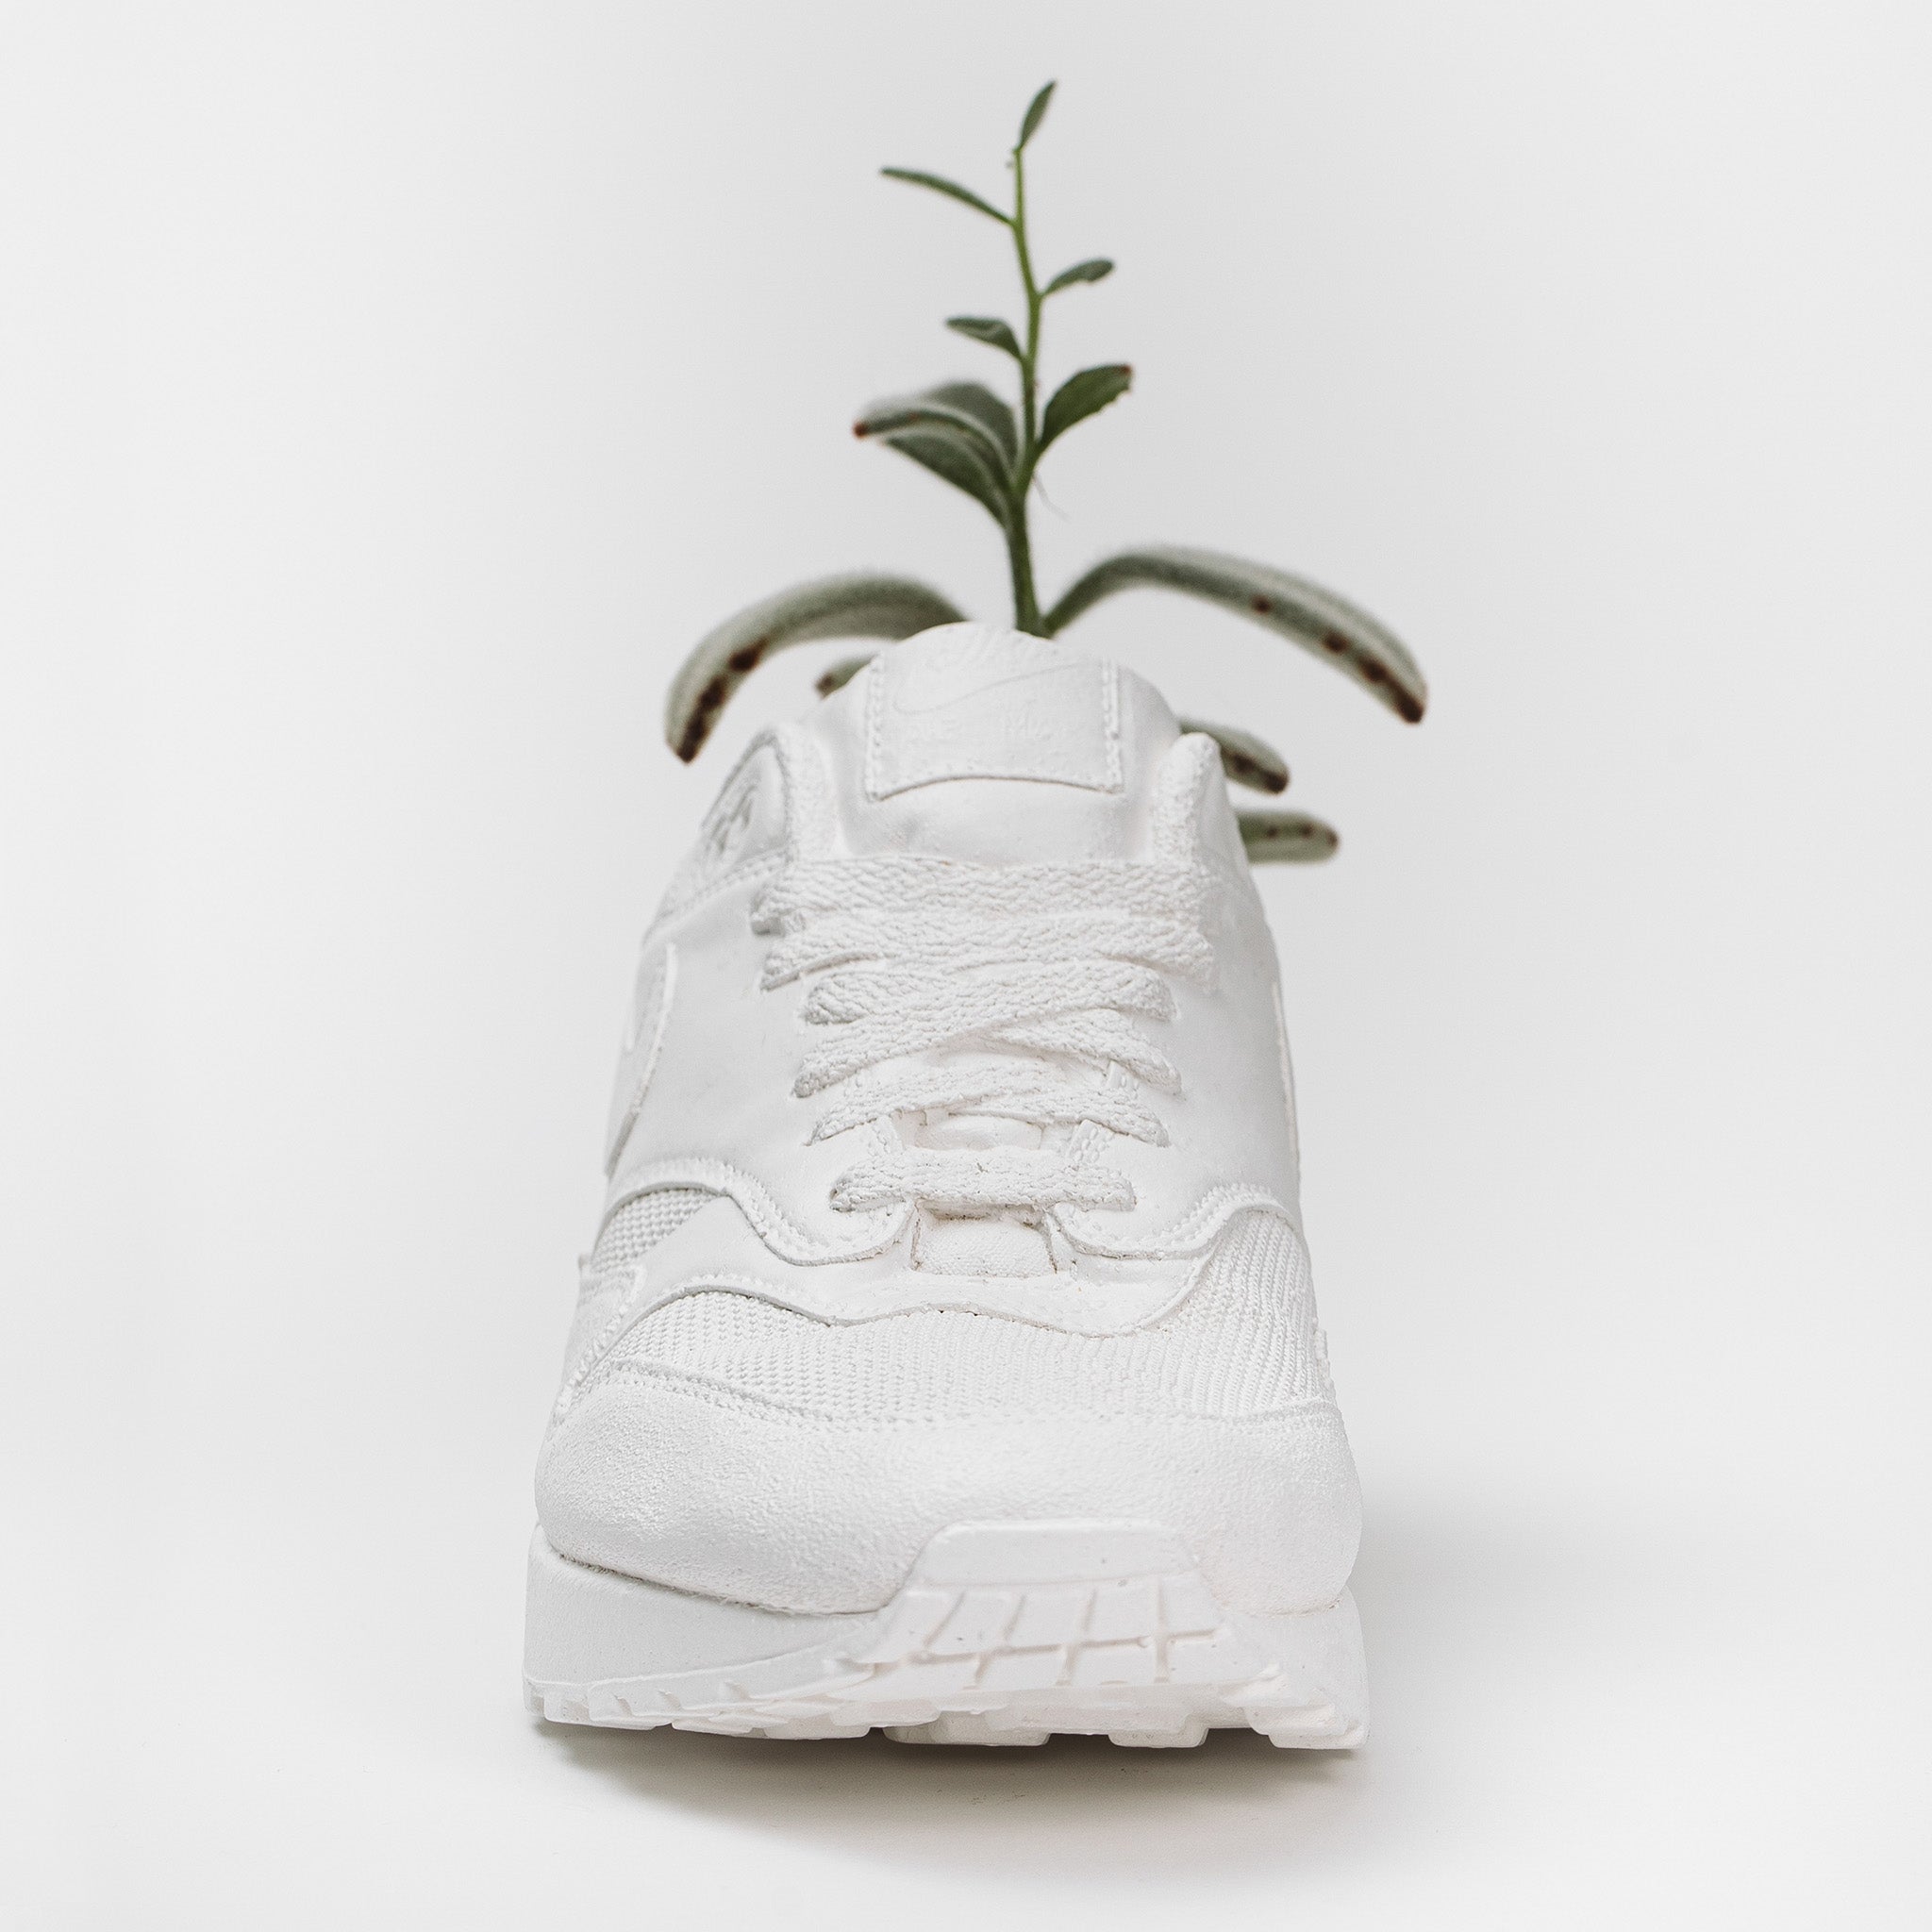 Front view of a nike air max concrete planter with a succulent planted in it